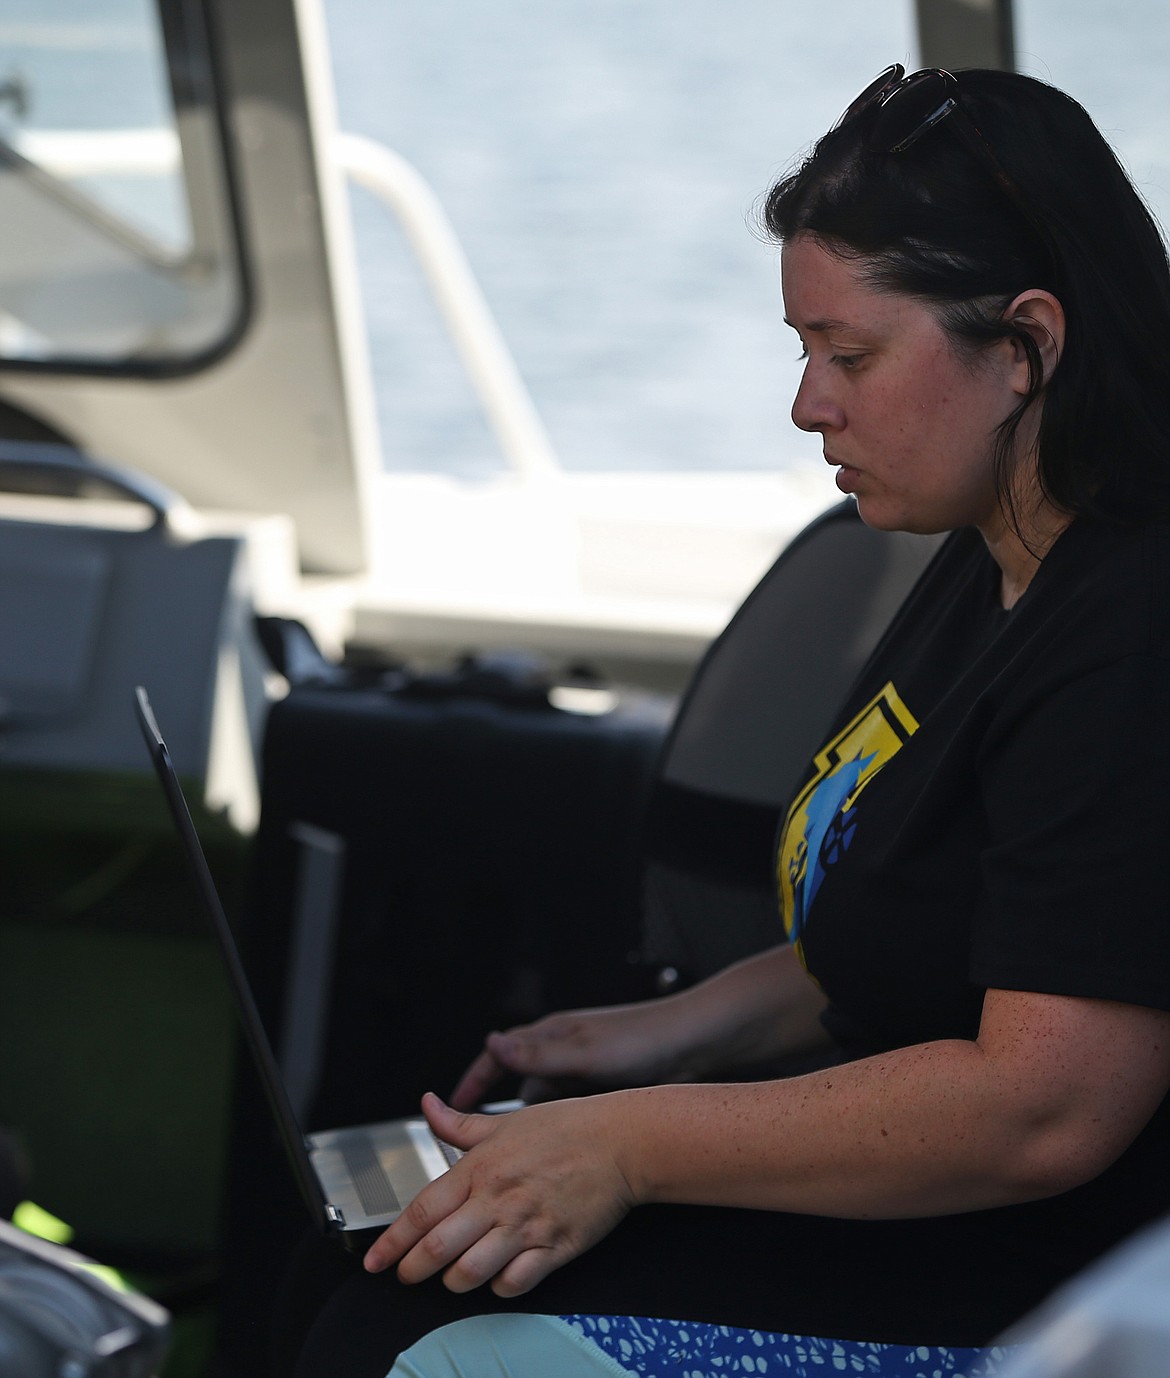 University of Idaho Coeur d'Alene undergraduate researcher Sam Freitas runs through her checklist on her laptop before lowering a  submersible drone into Lake Coeur d'Alene. Both Freitas and graduate researcher Adrian Beehner have spent more than 1,000 hours working to program artificial intelligence into the submersible drone &quot;Catfish.&quot;  (LOREN BENOIT/Press)